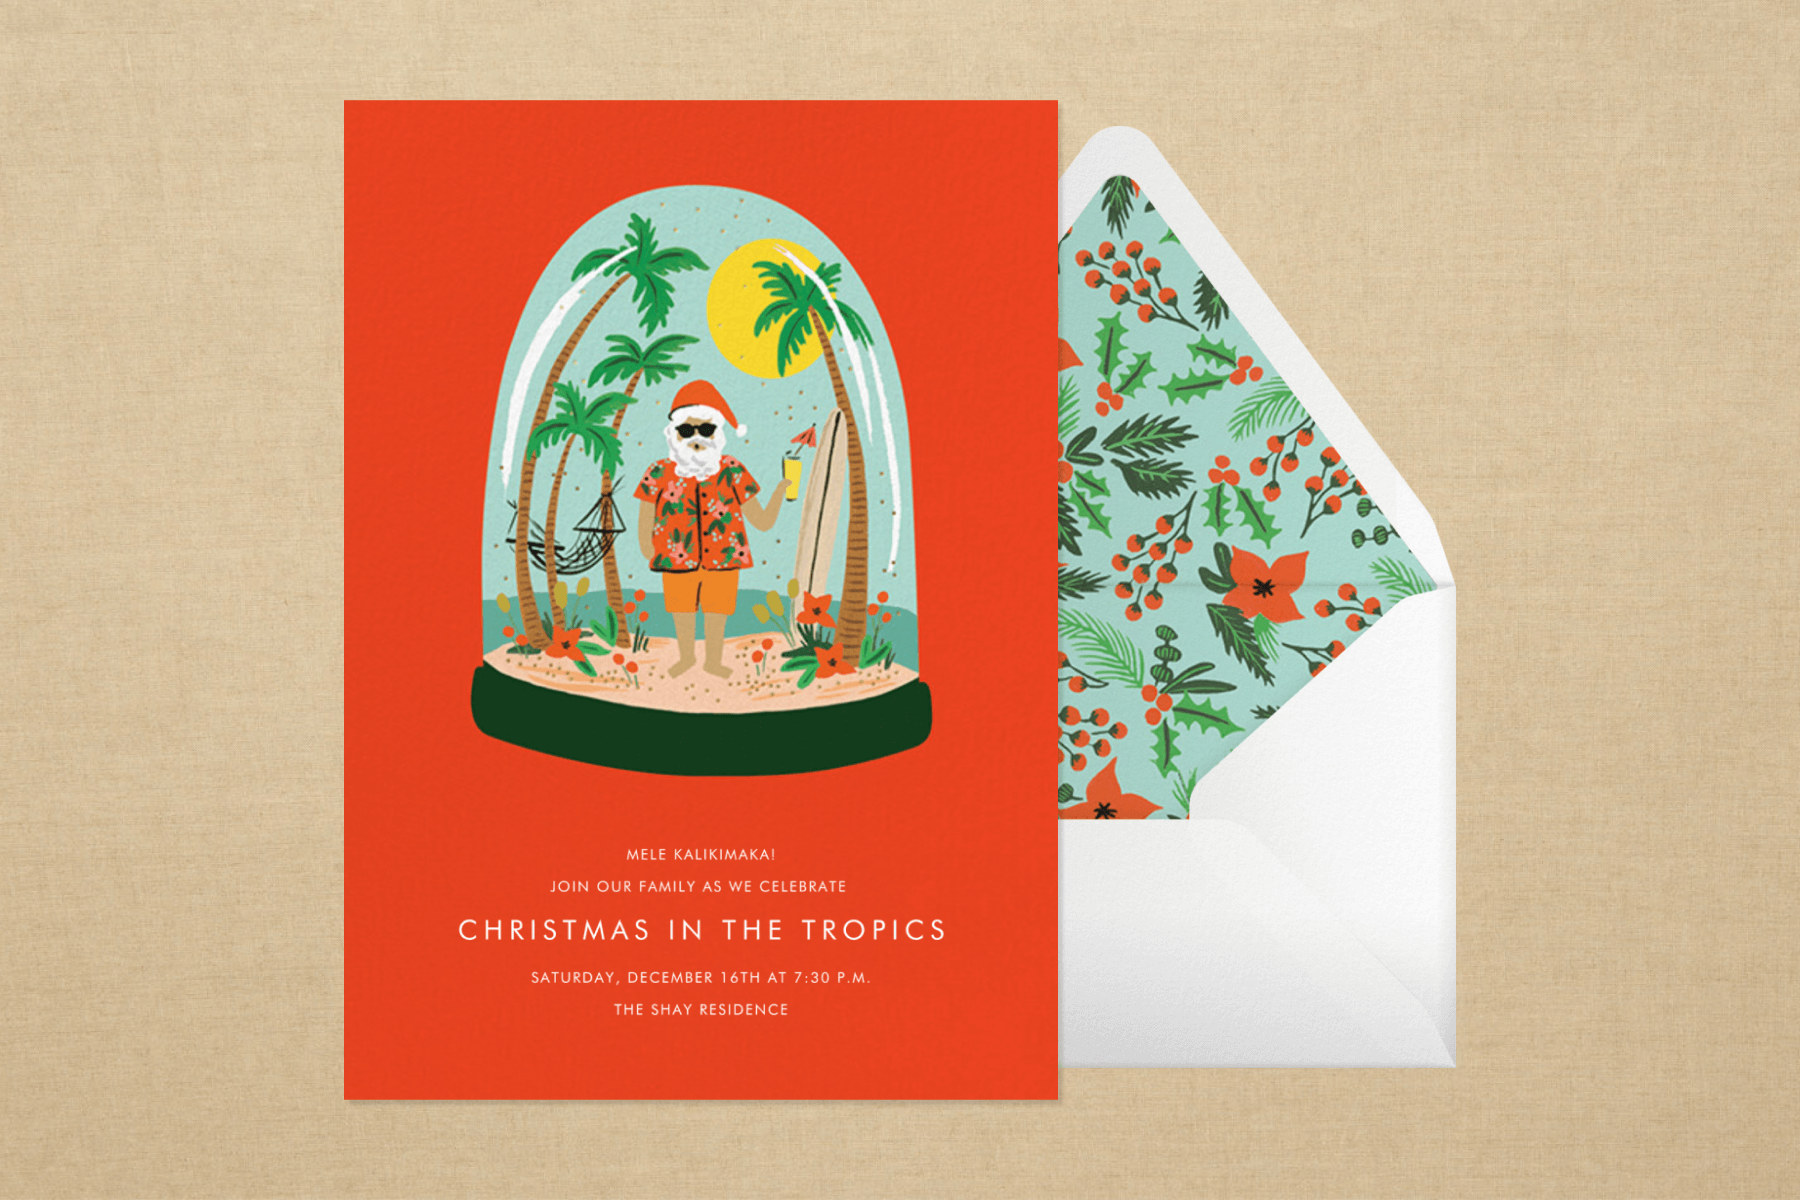 A red card with a snow globe featuring Santa in tropical garb on a beach.